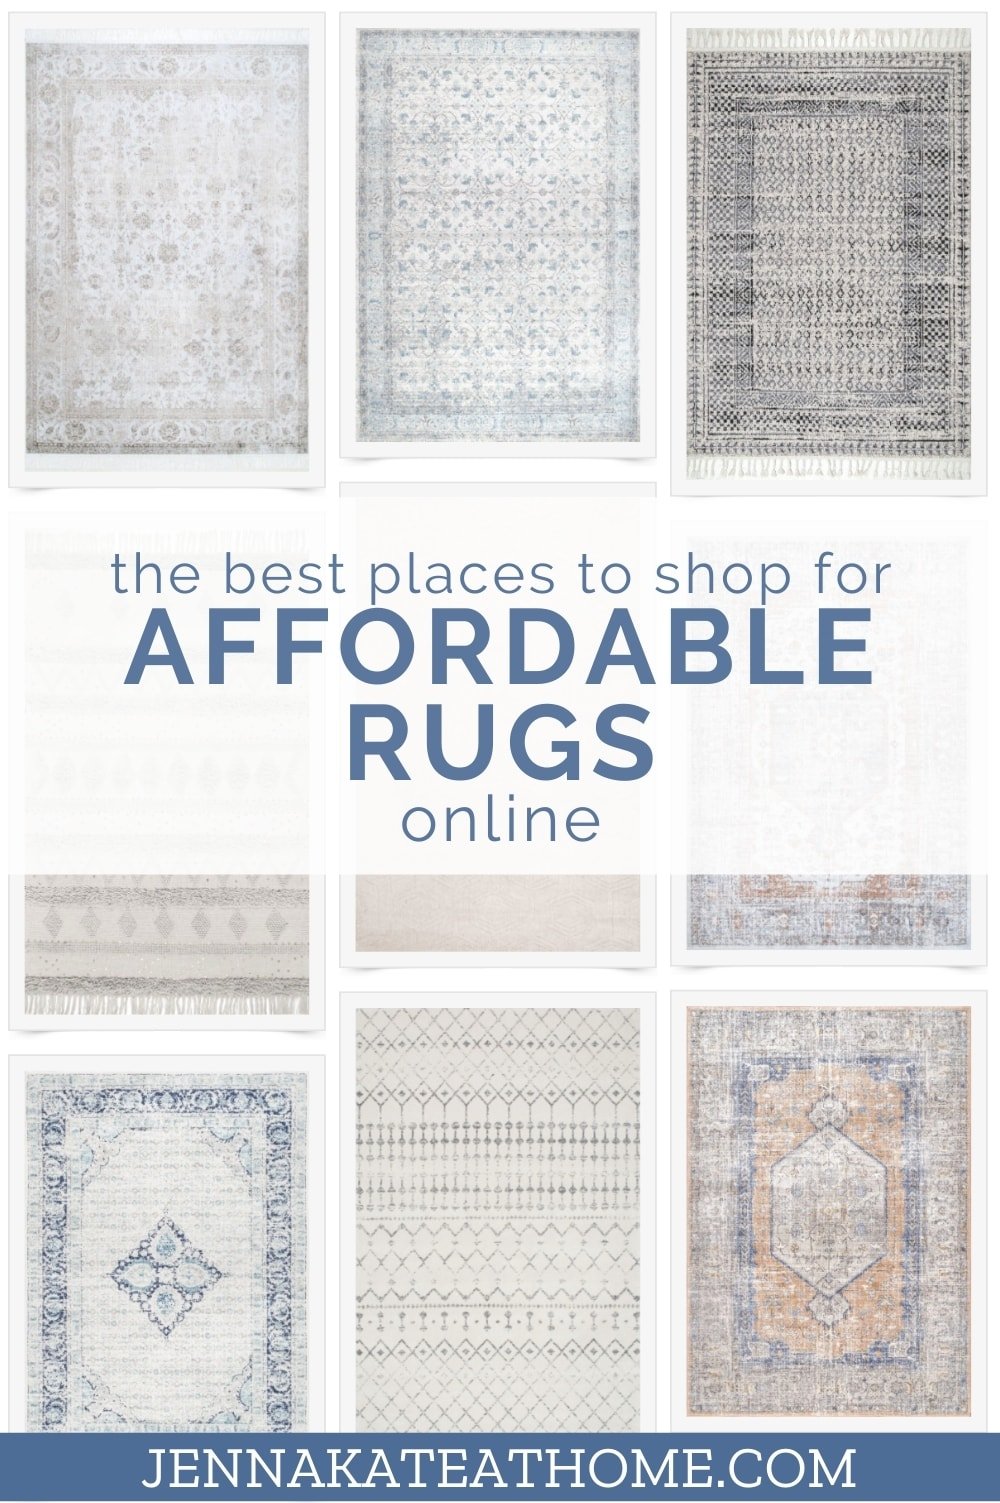 Where To Buy Affordable Rugs Online